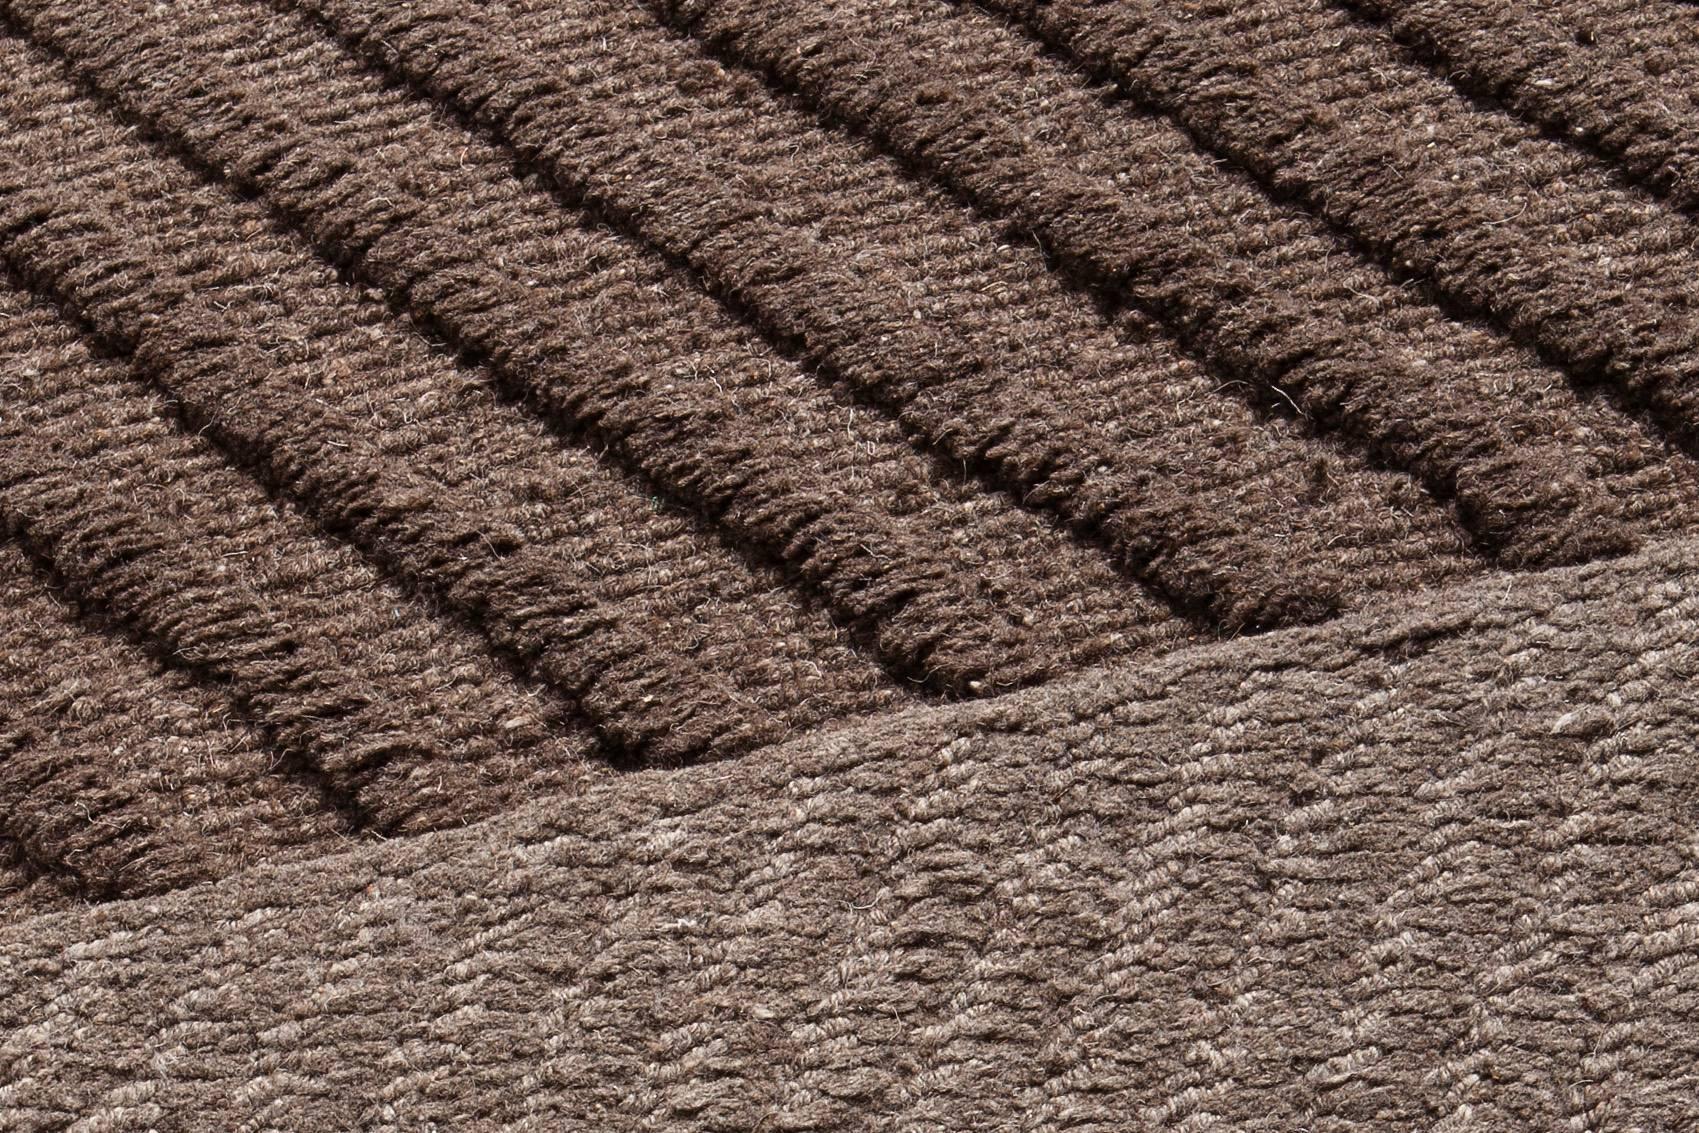 Himalayan Undyed is a collection of design rugs, handmade in Nepal from 100% Himalayan undyed wool pile knotted to a cotton warp.
 
The yarns are unbleached and undyed, coming from Tibetan highland sheep whose natural color hues range from creamy